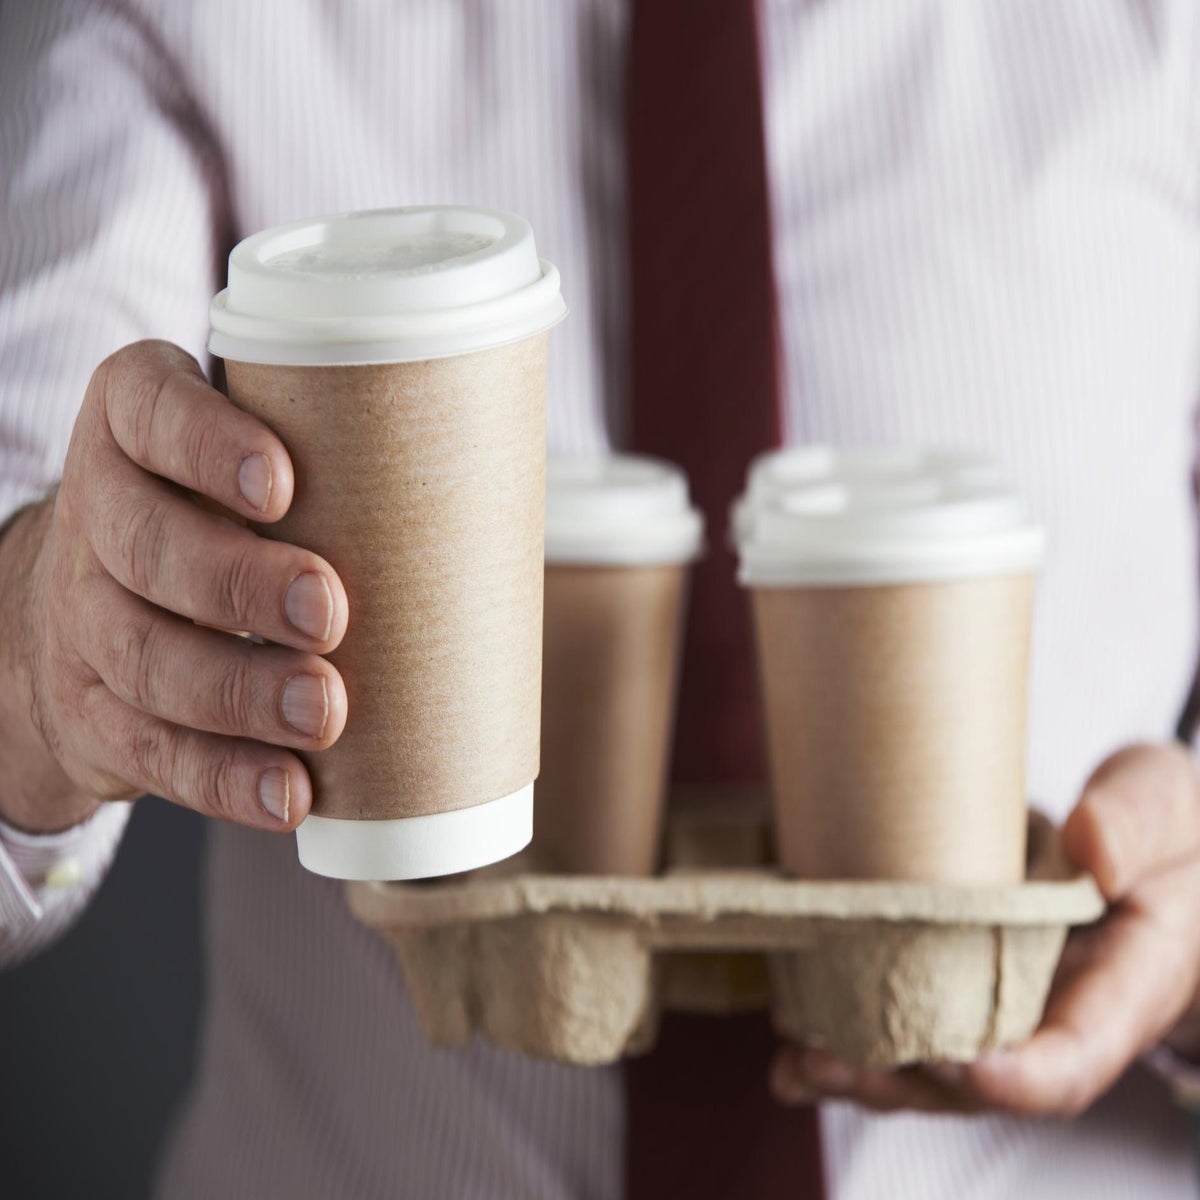 https://static.independent.co.uk/s3fs-public/thumbnails/image/2018/01/04/16/disposable-coffee-cups.jpg?width=1200&height=1200&fit=crop